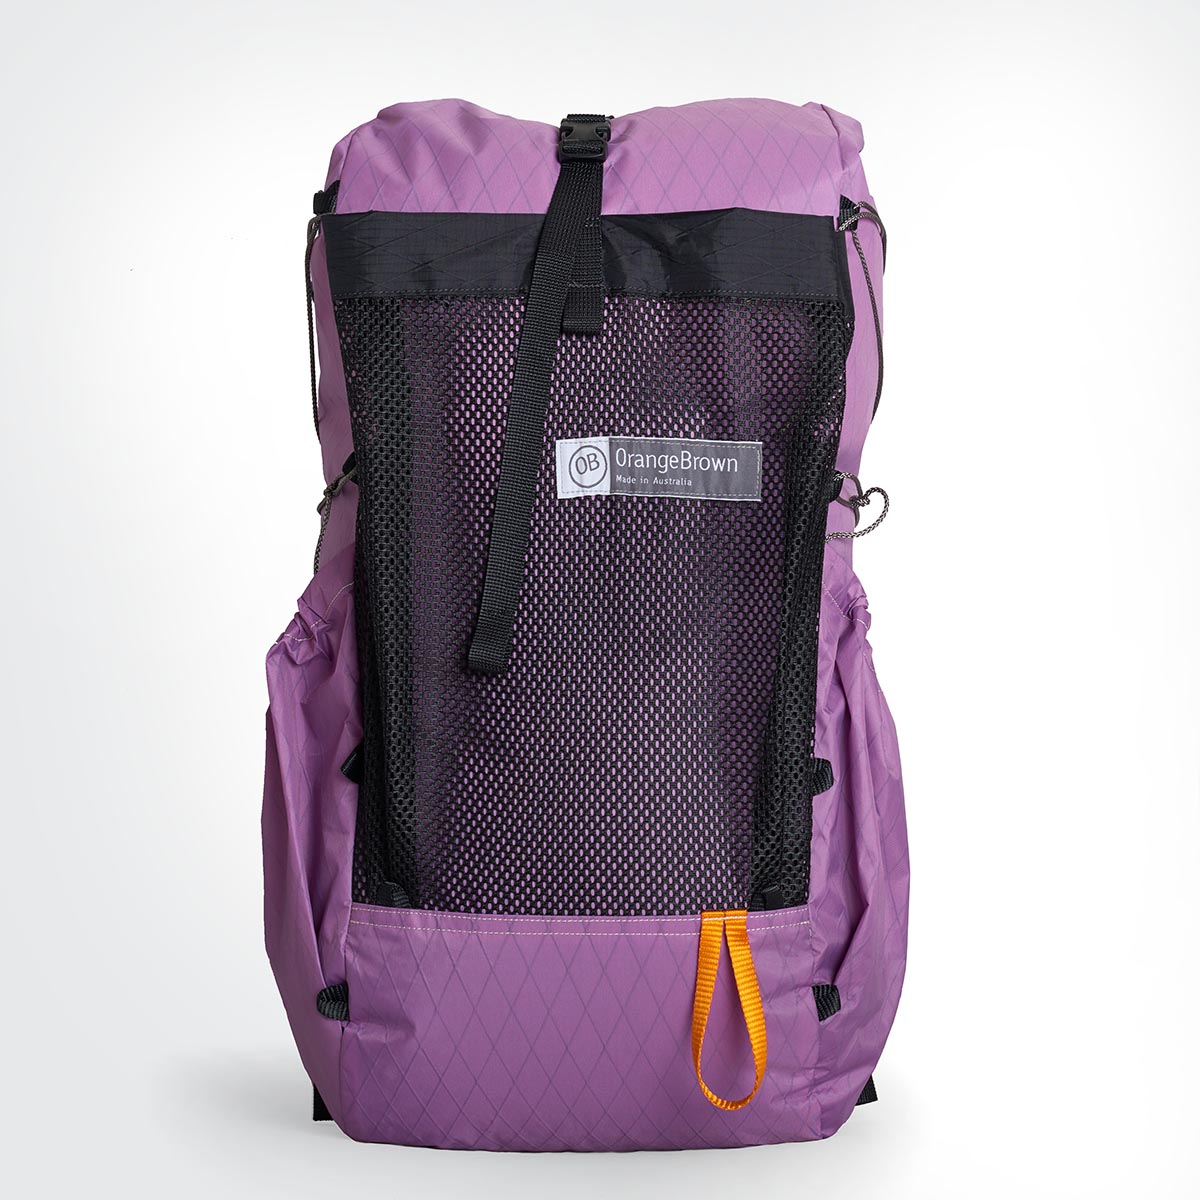 OrangeBrown backpack OB 36 made in Australia. Handmade from X-Pac VX21 fabric in colour mulberry. Featuring front mesh pocket and multiple tie down webbing loops.